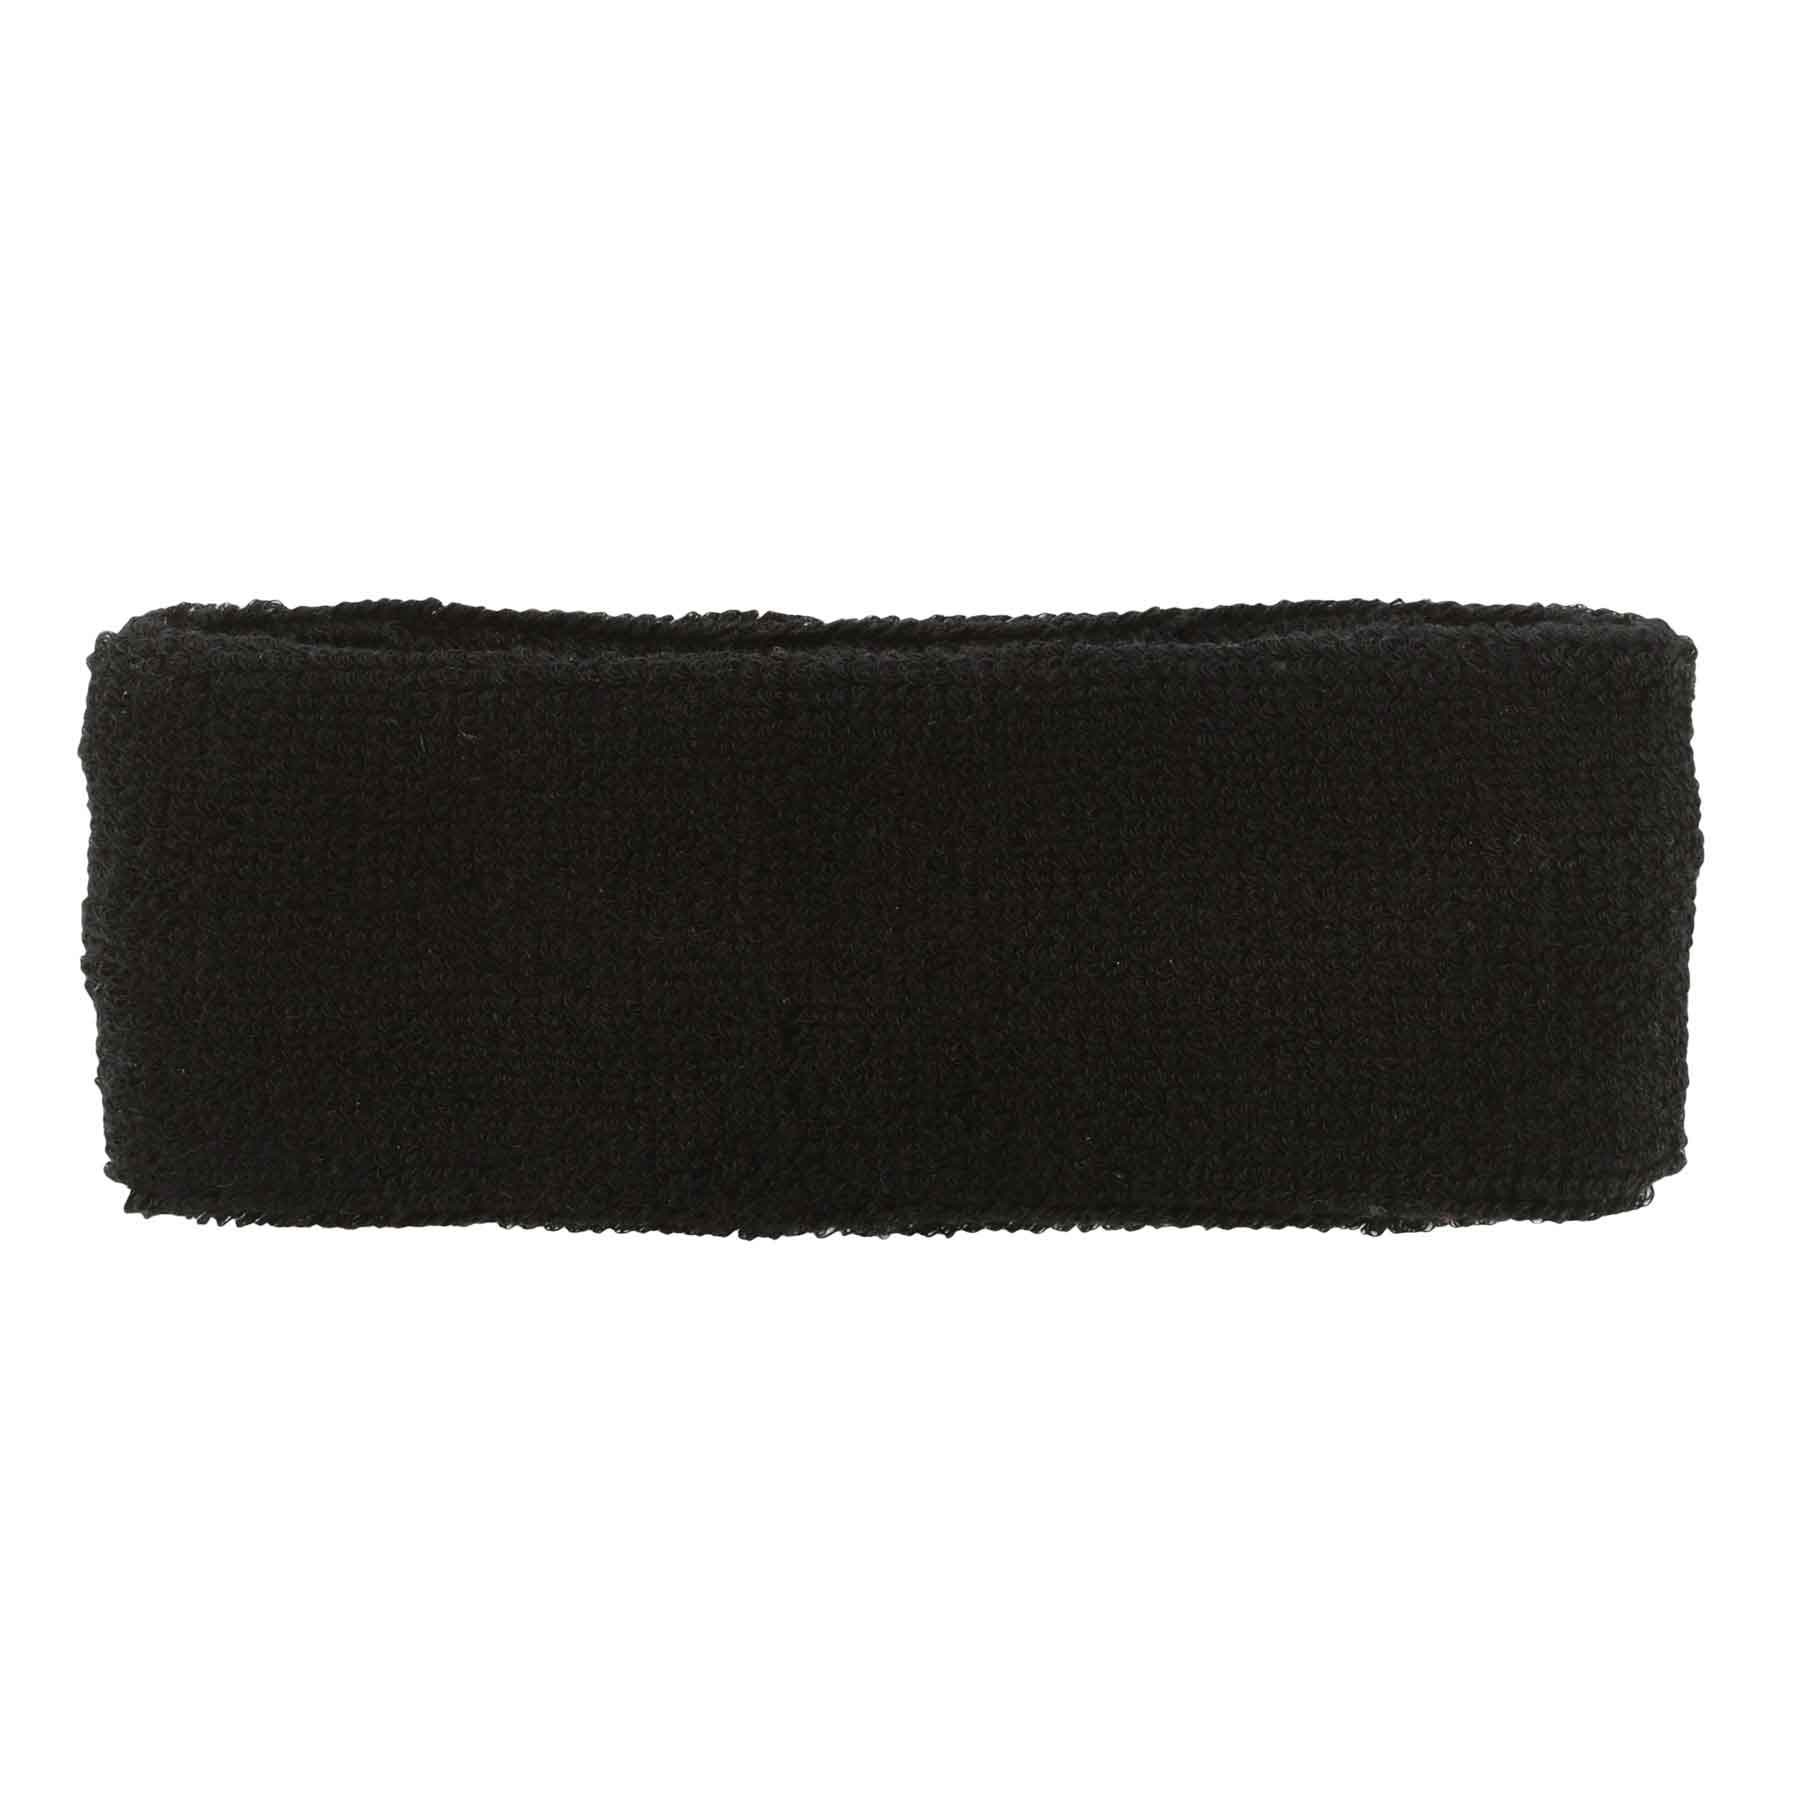 Head Sweatband - Cooling Devices